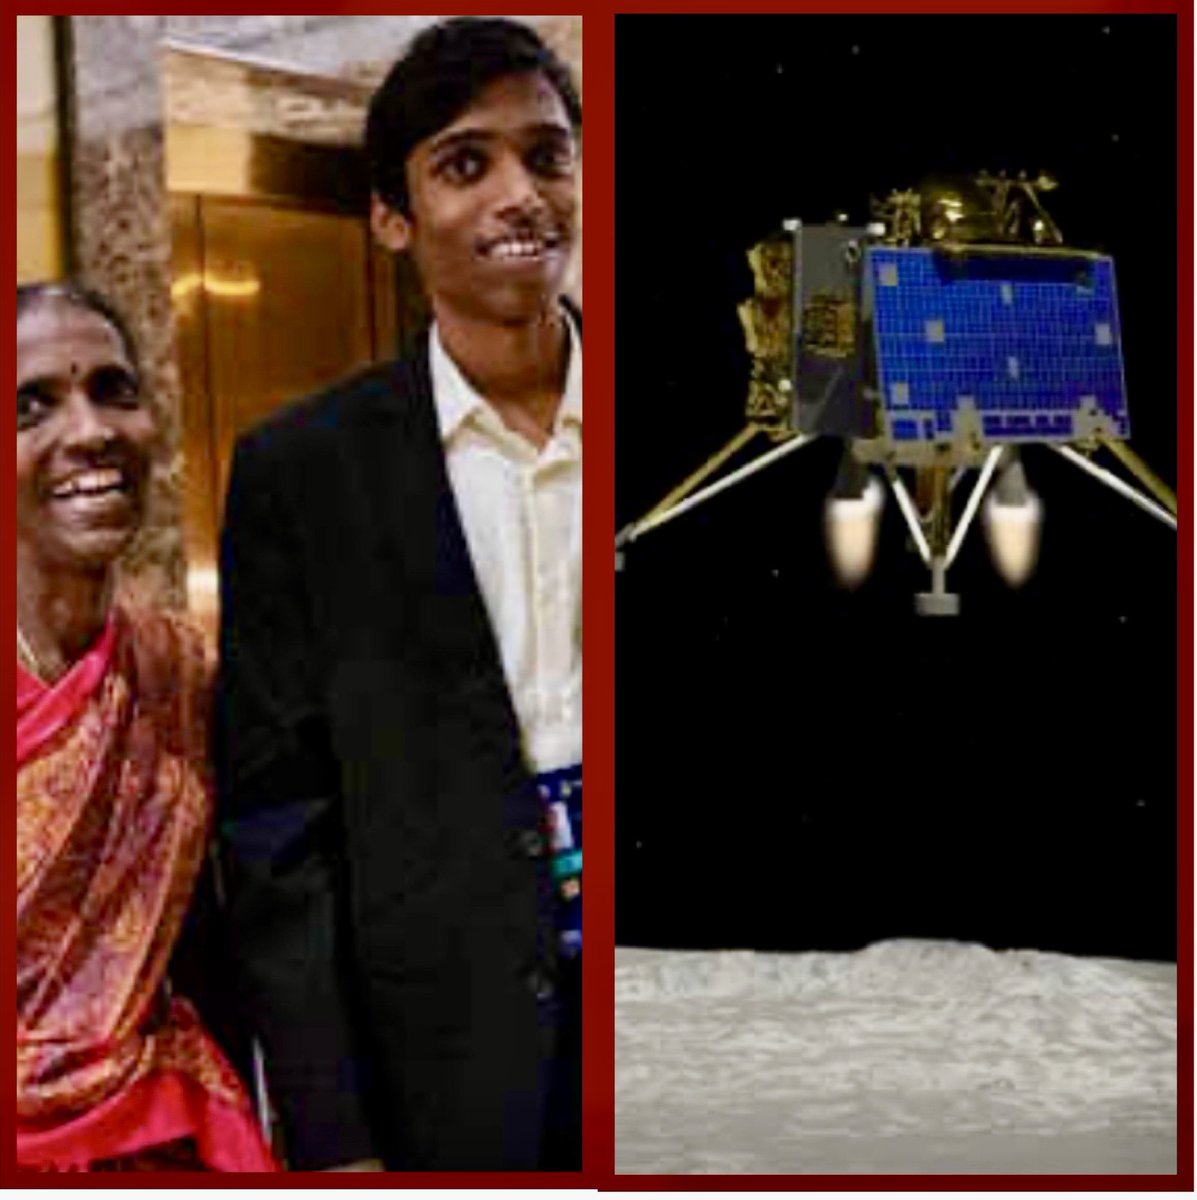 Go Pragyaan and Praggnandha for your final best efforts. You have already made entire BHARAT proud.. Entire Nation is indebted to ISRO for Pragyaan and mother of Praggnandha for giving this proud day and proud moments to BHARAT- Piyush Tiwari